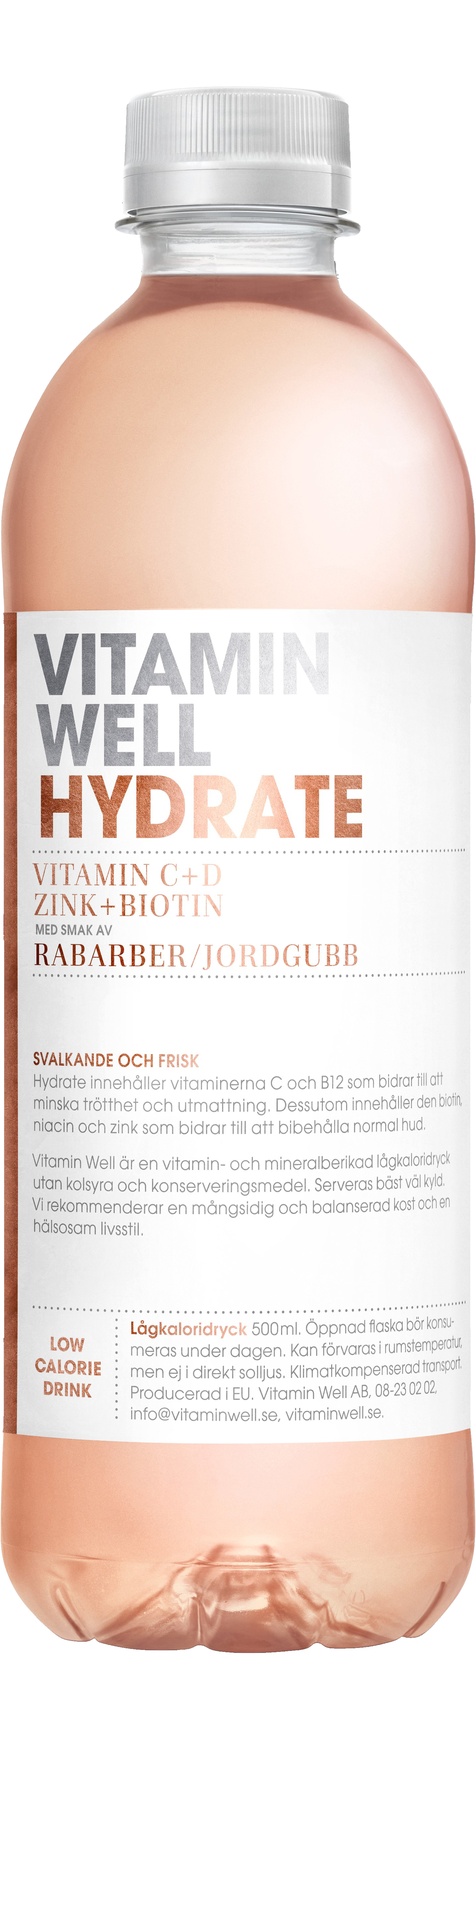 [8564243] Vitamin Well Hydrate 50cl ink